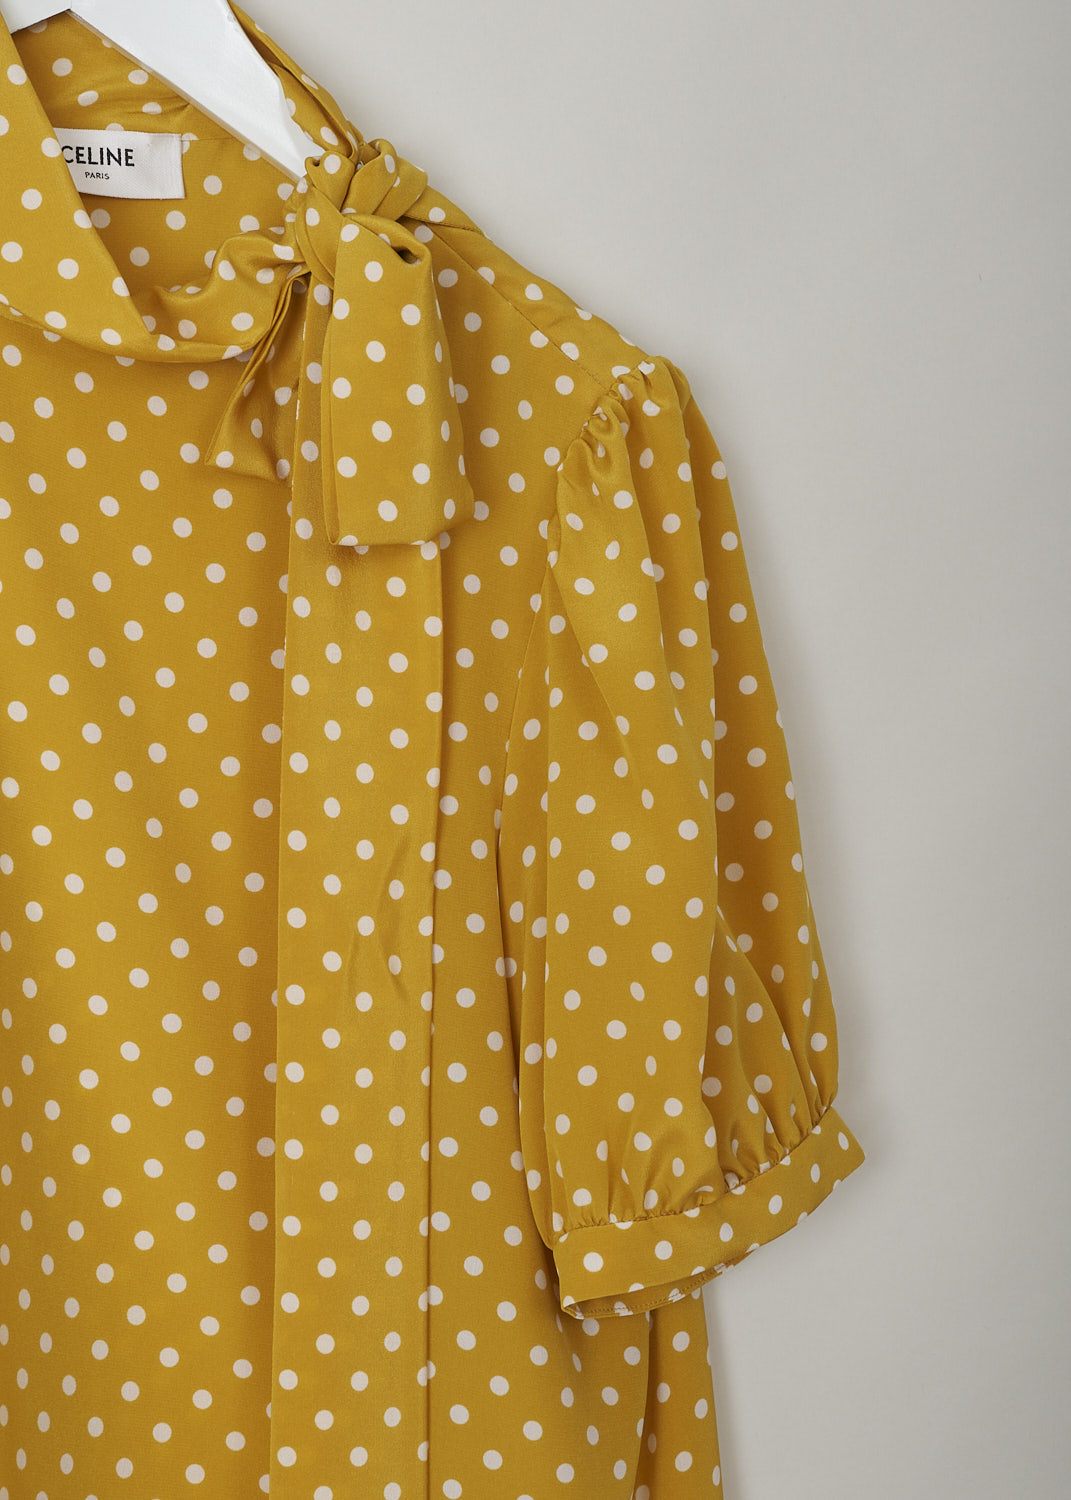 CELINE, MUSTARD YELLOW POLKA DOT TOP WITH PUSSY BOW, 966H_2B606_11TC, Yellow, Print, Detail, This mustard yellow top has a white polka dot print. The top has a high neck with a pussy bow to one side. The top has short puff sleeves. The closure option is a concealed zipper on the left shoulder.   
